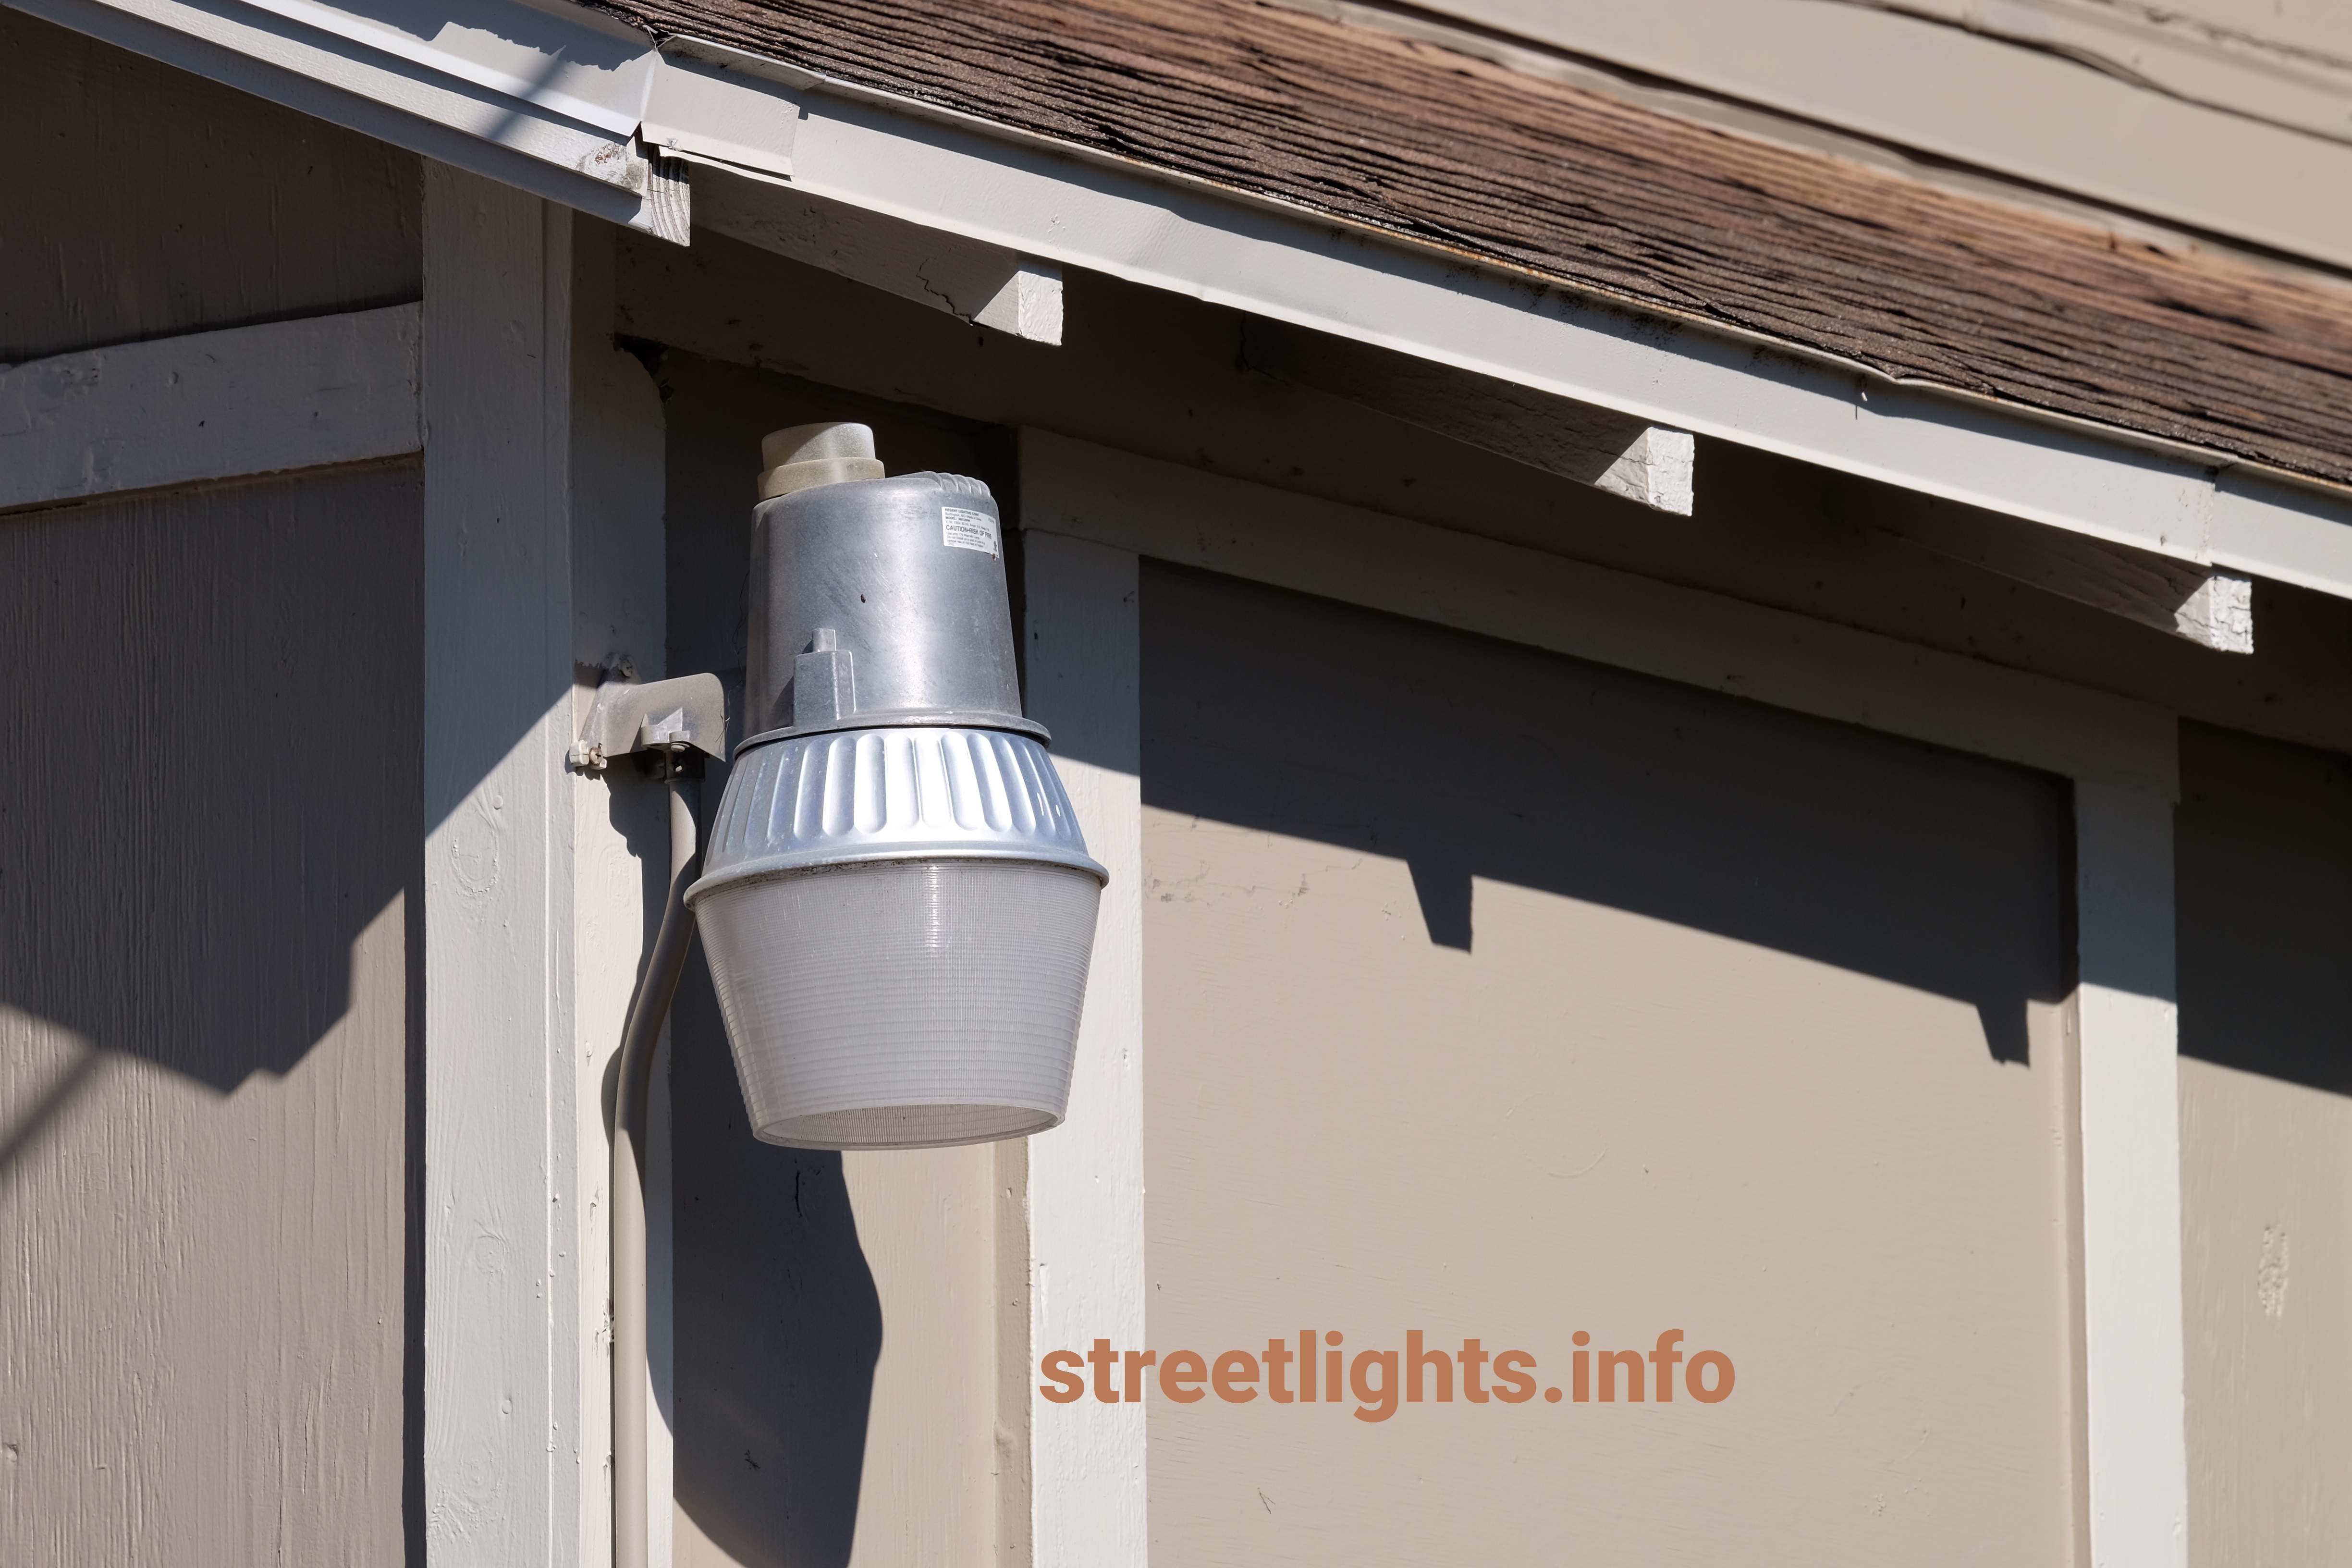 An example of a non-LED bucket light yard light.